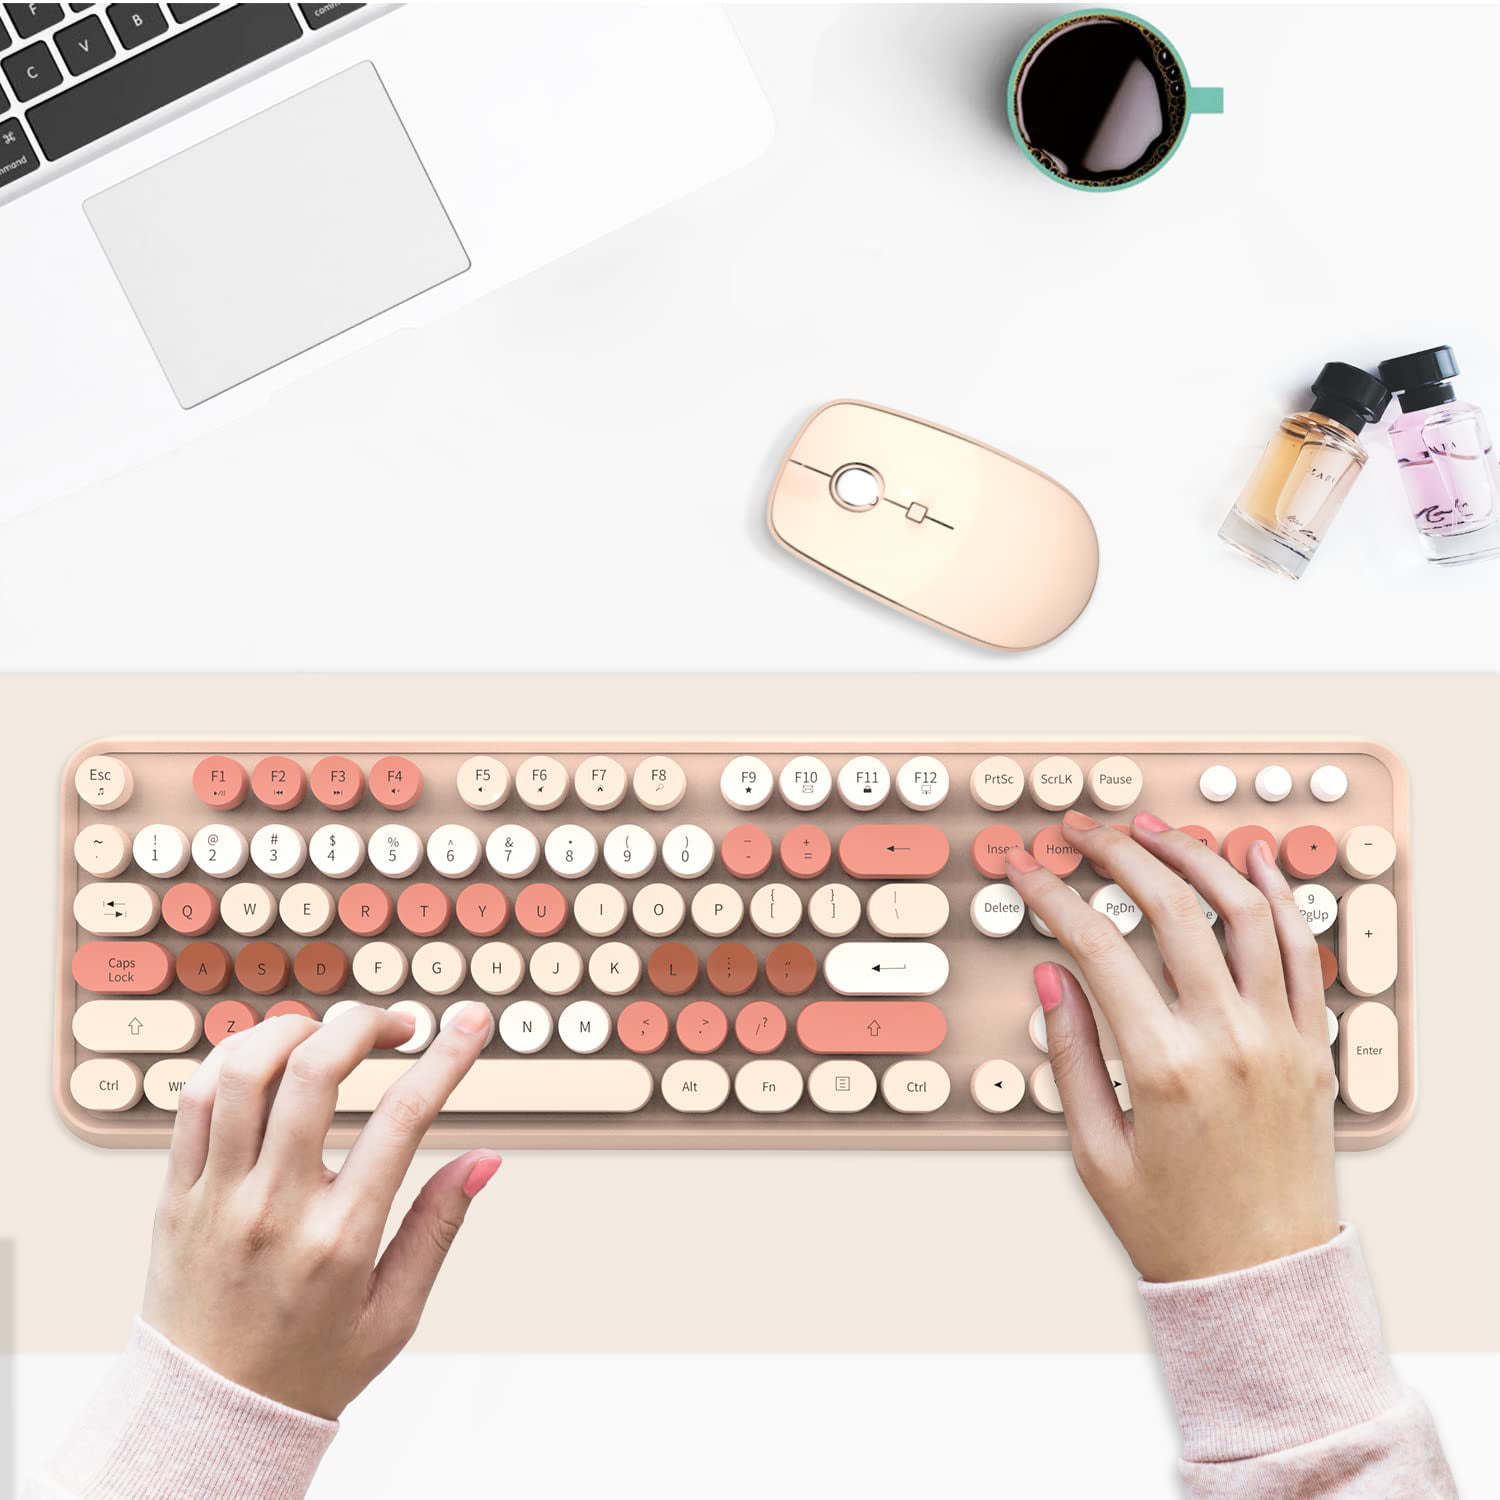 Wireless Keyboard Mouse Combo, 2.4GHz Wireless Typewriter Keyboard with 104  Colorful Round Keys, Letton Wireless Retro Full Size Keyboard and Cute  Mouse with DPI for PC Laptop Mac Desktop